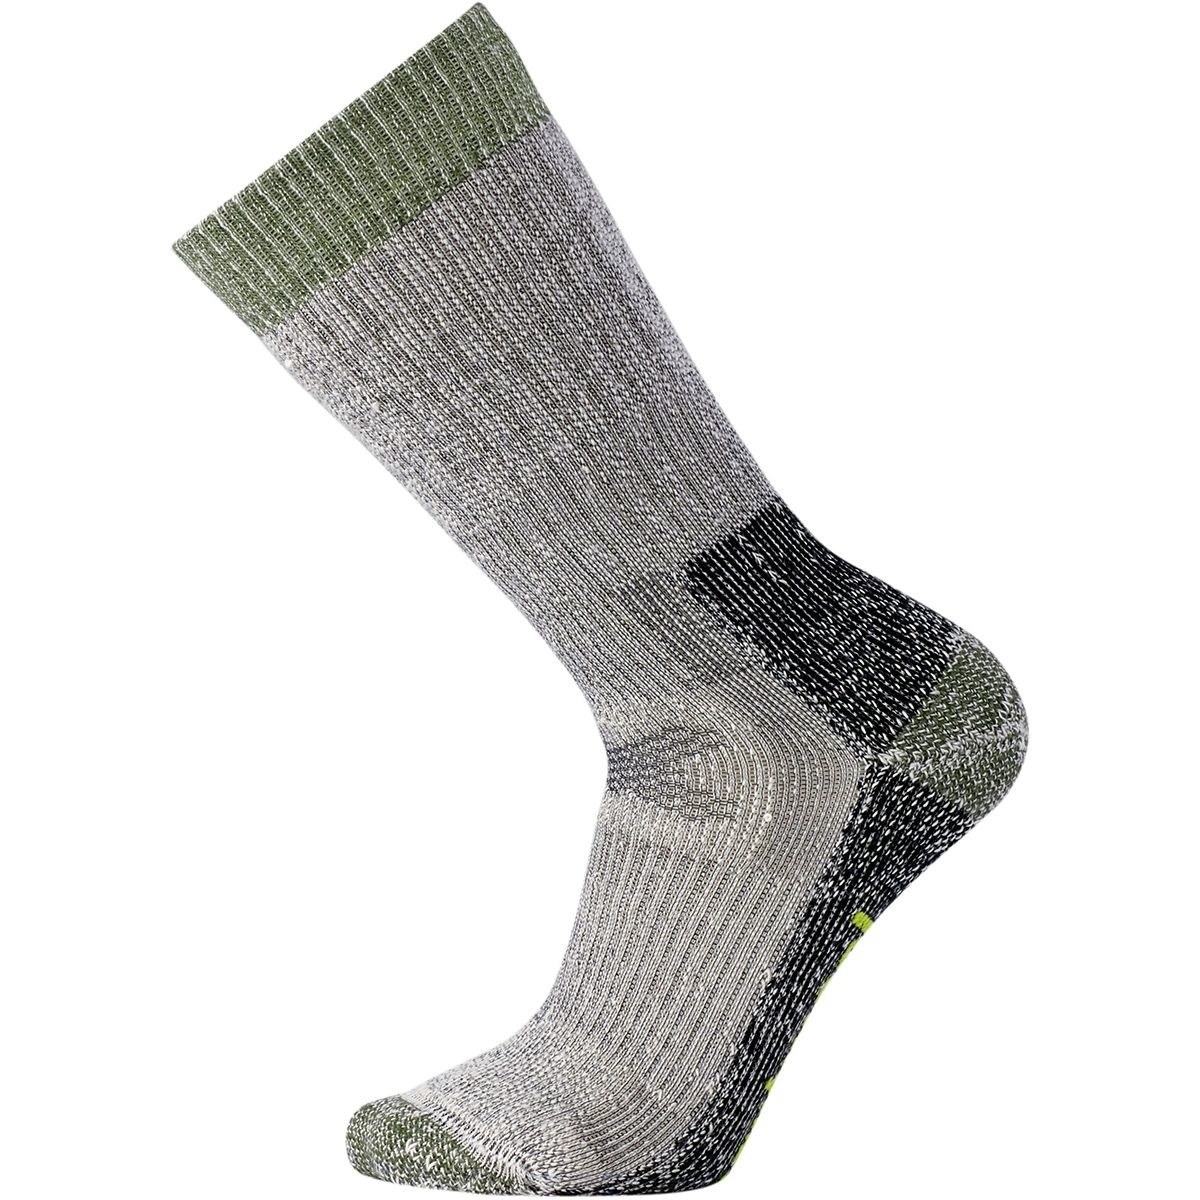 The hunting sock